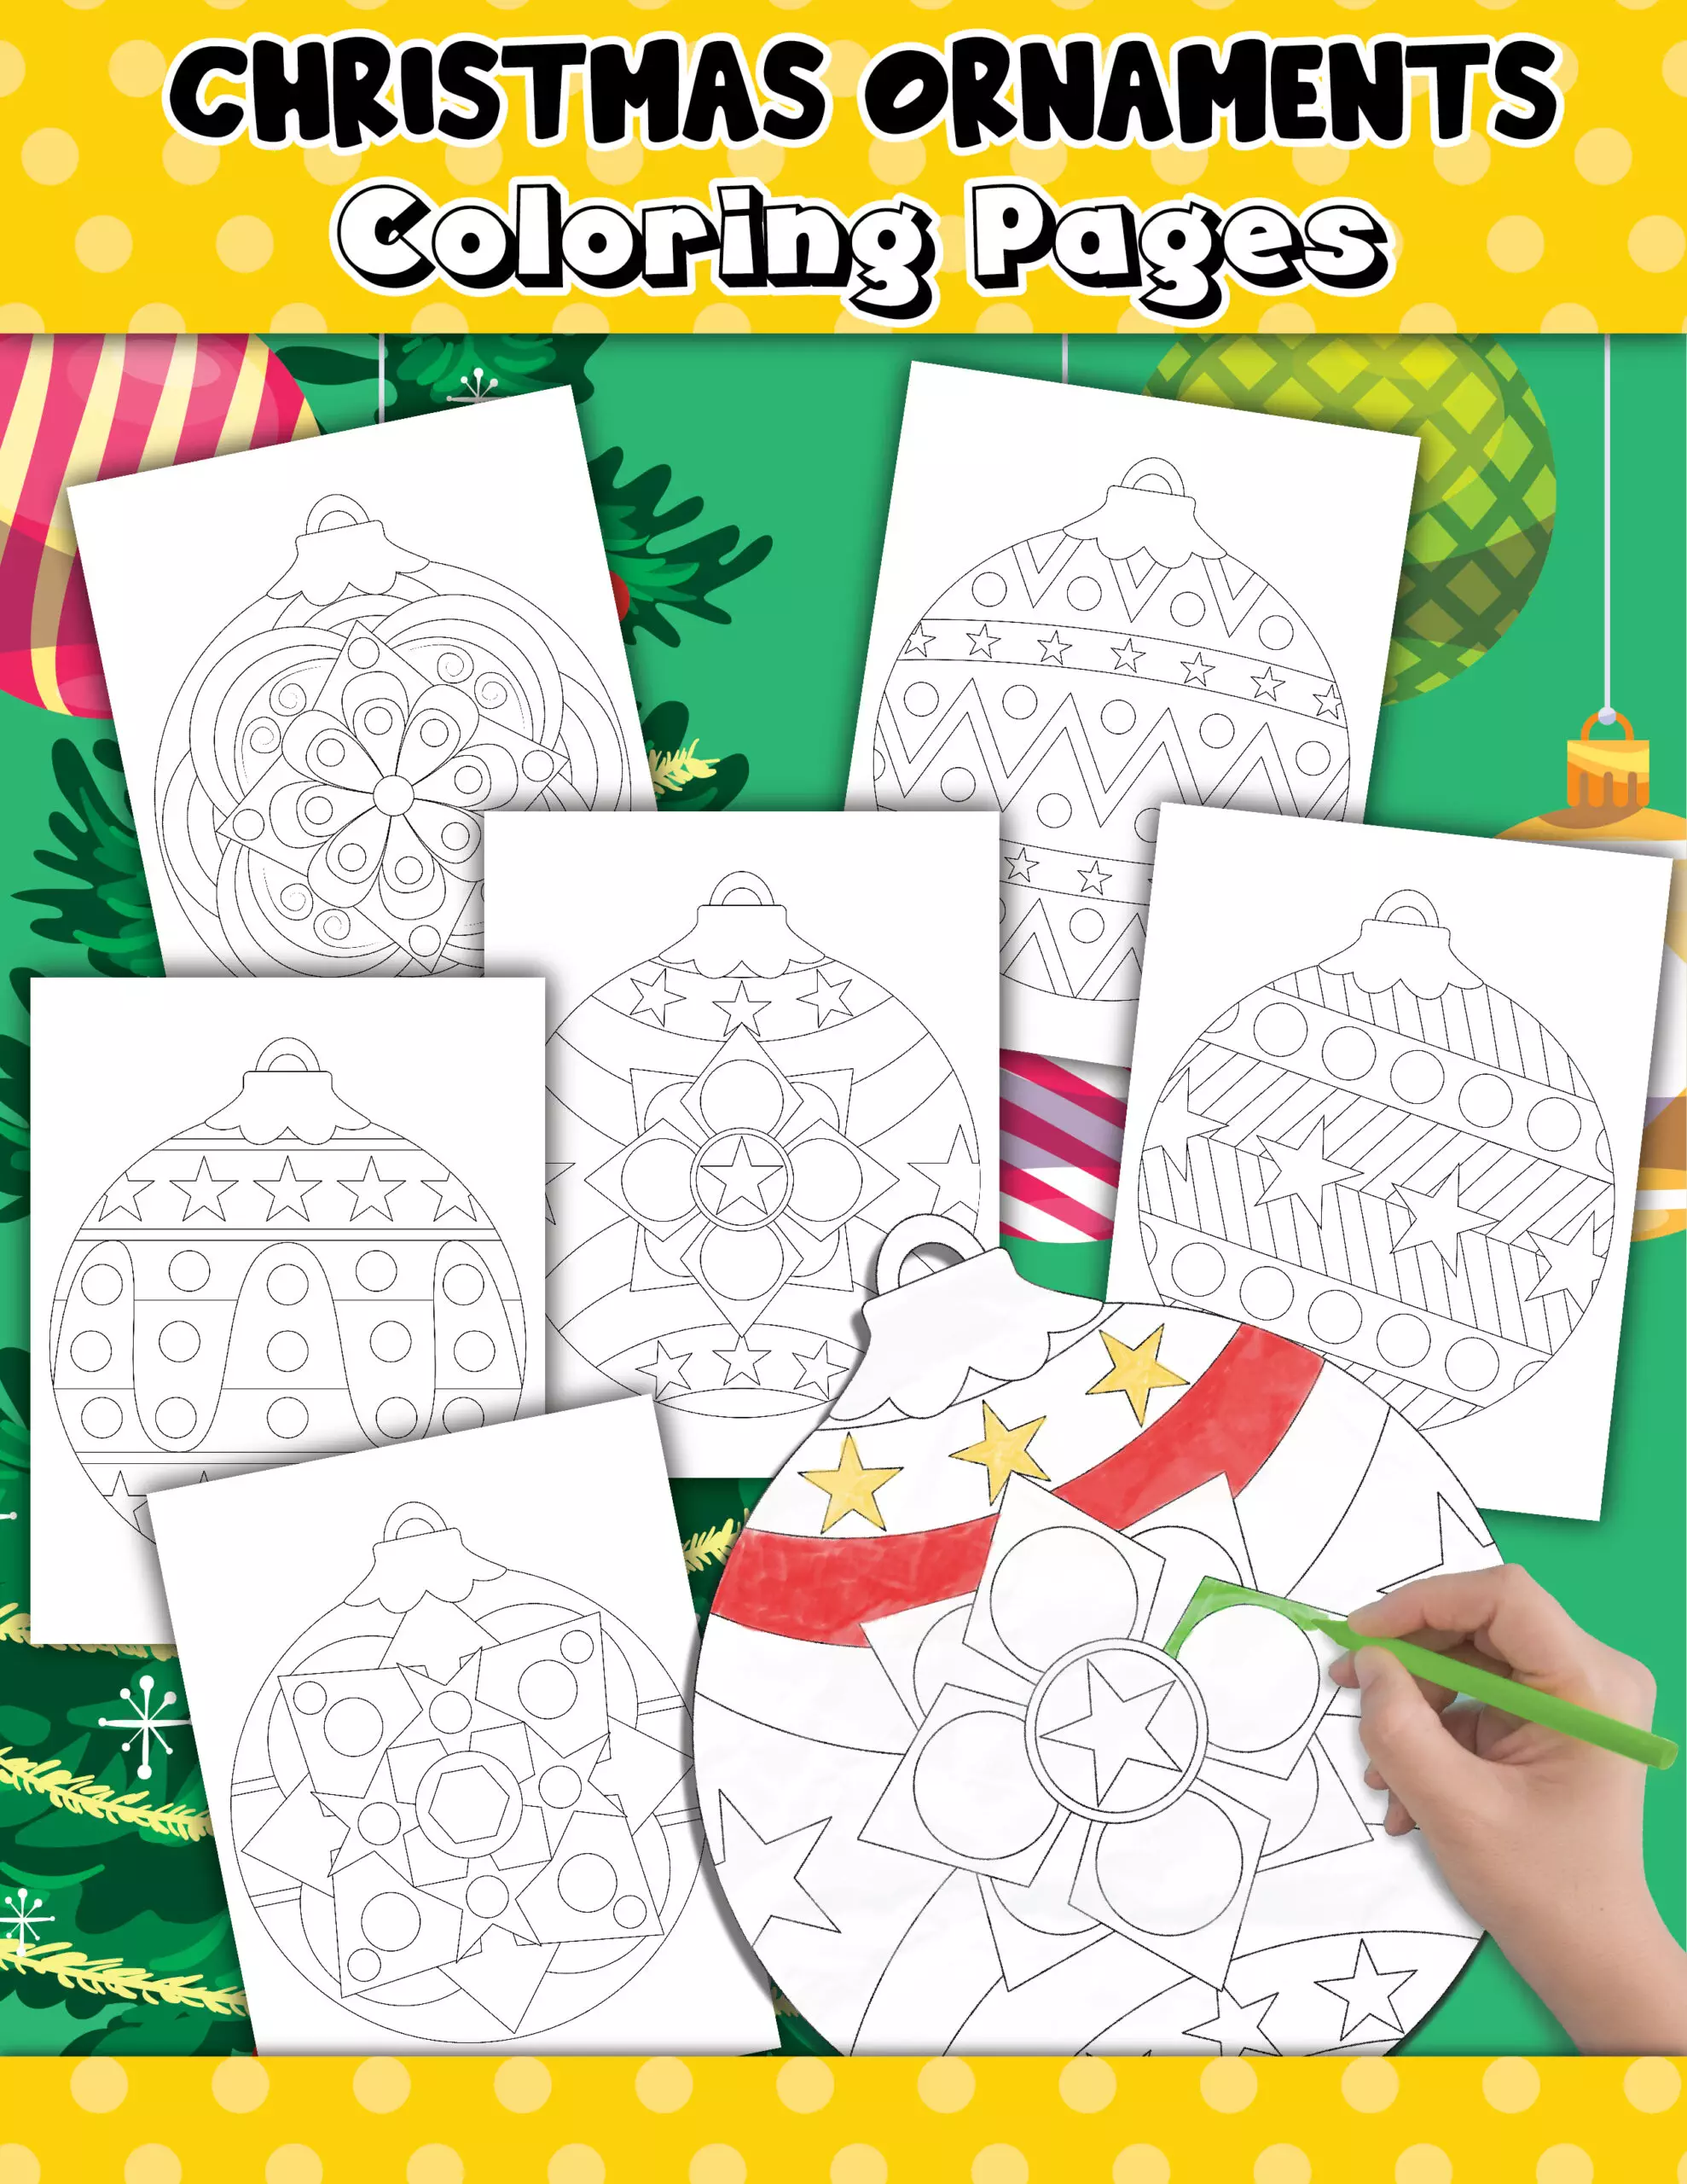 Christmas ornament coloring pages mockup